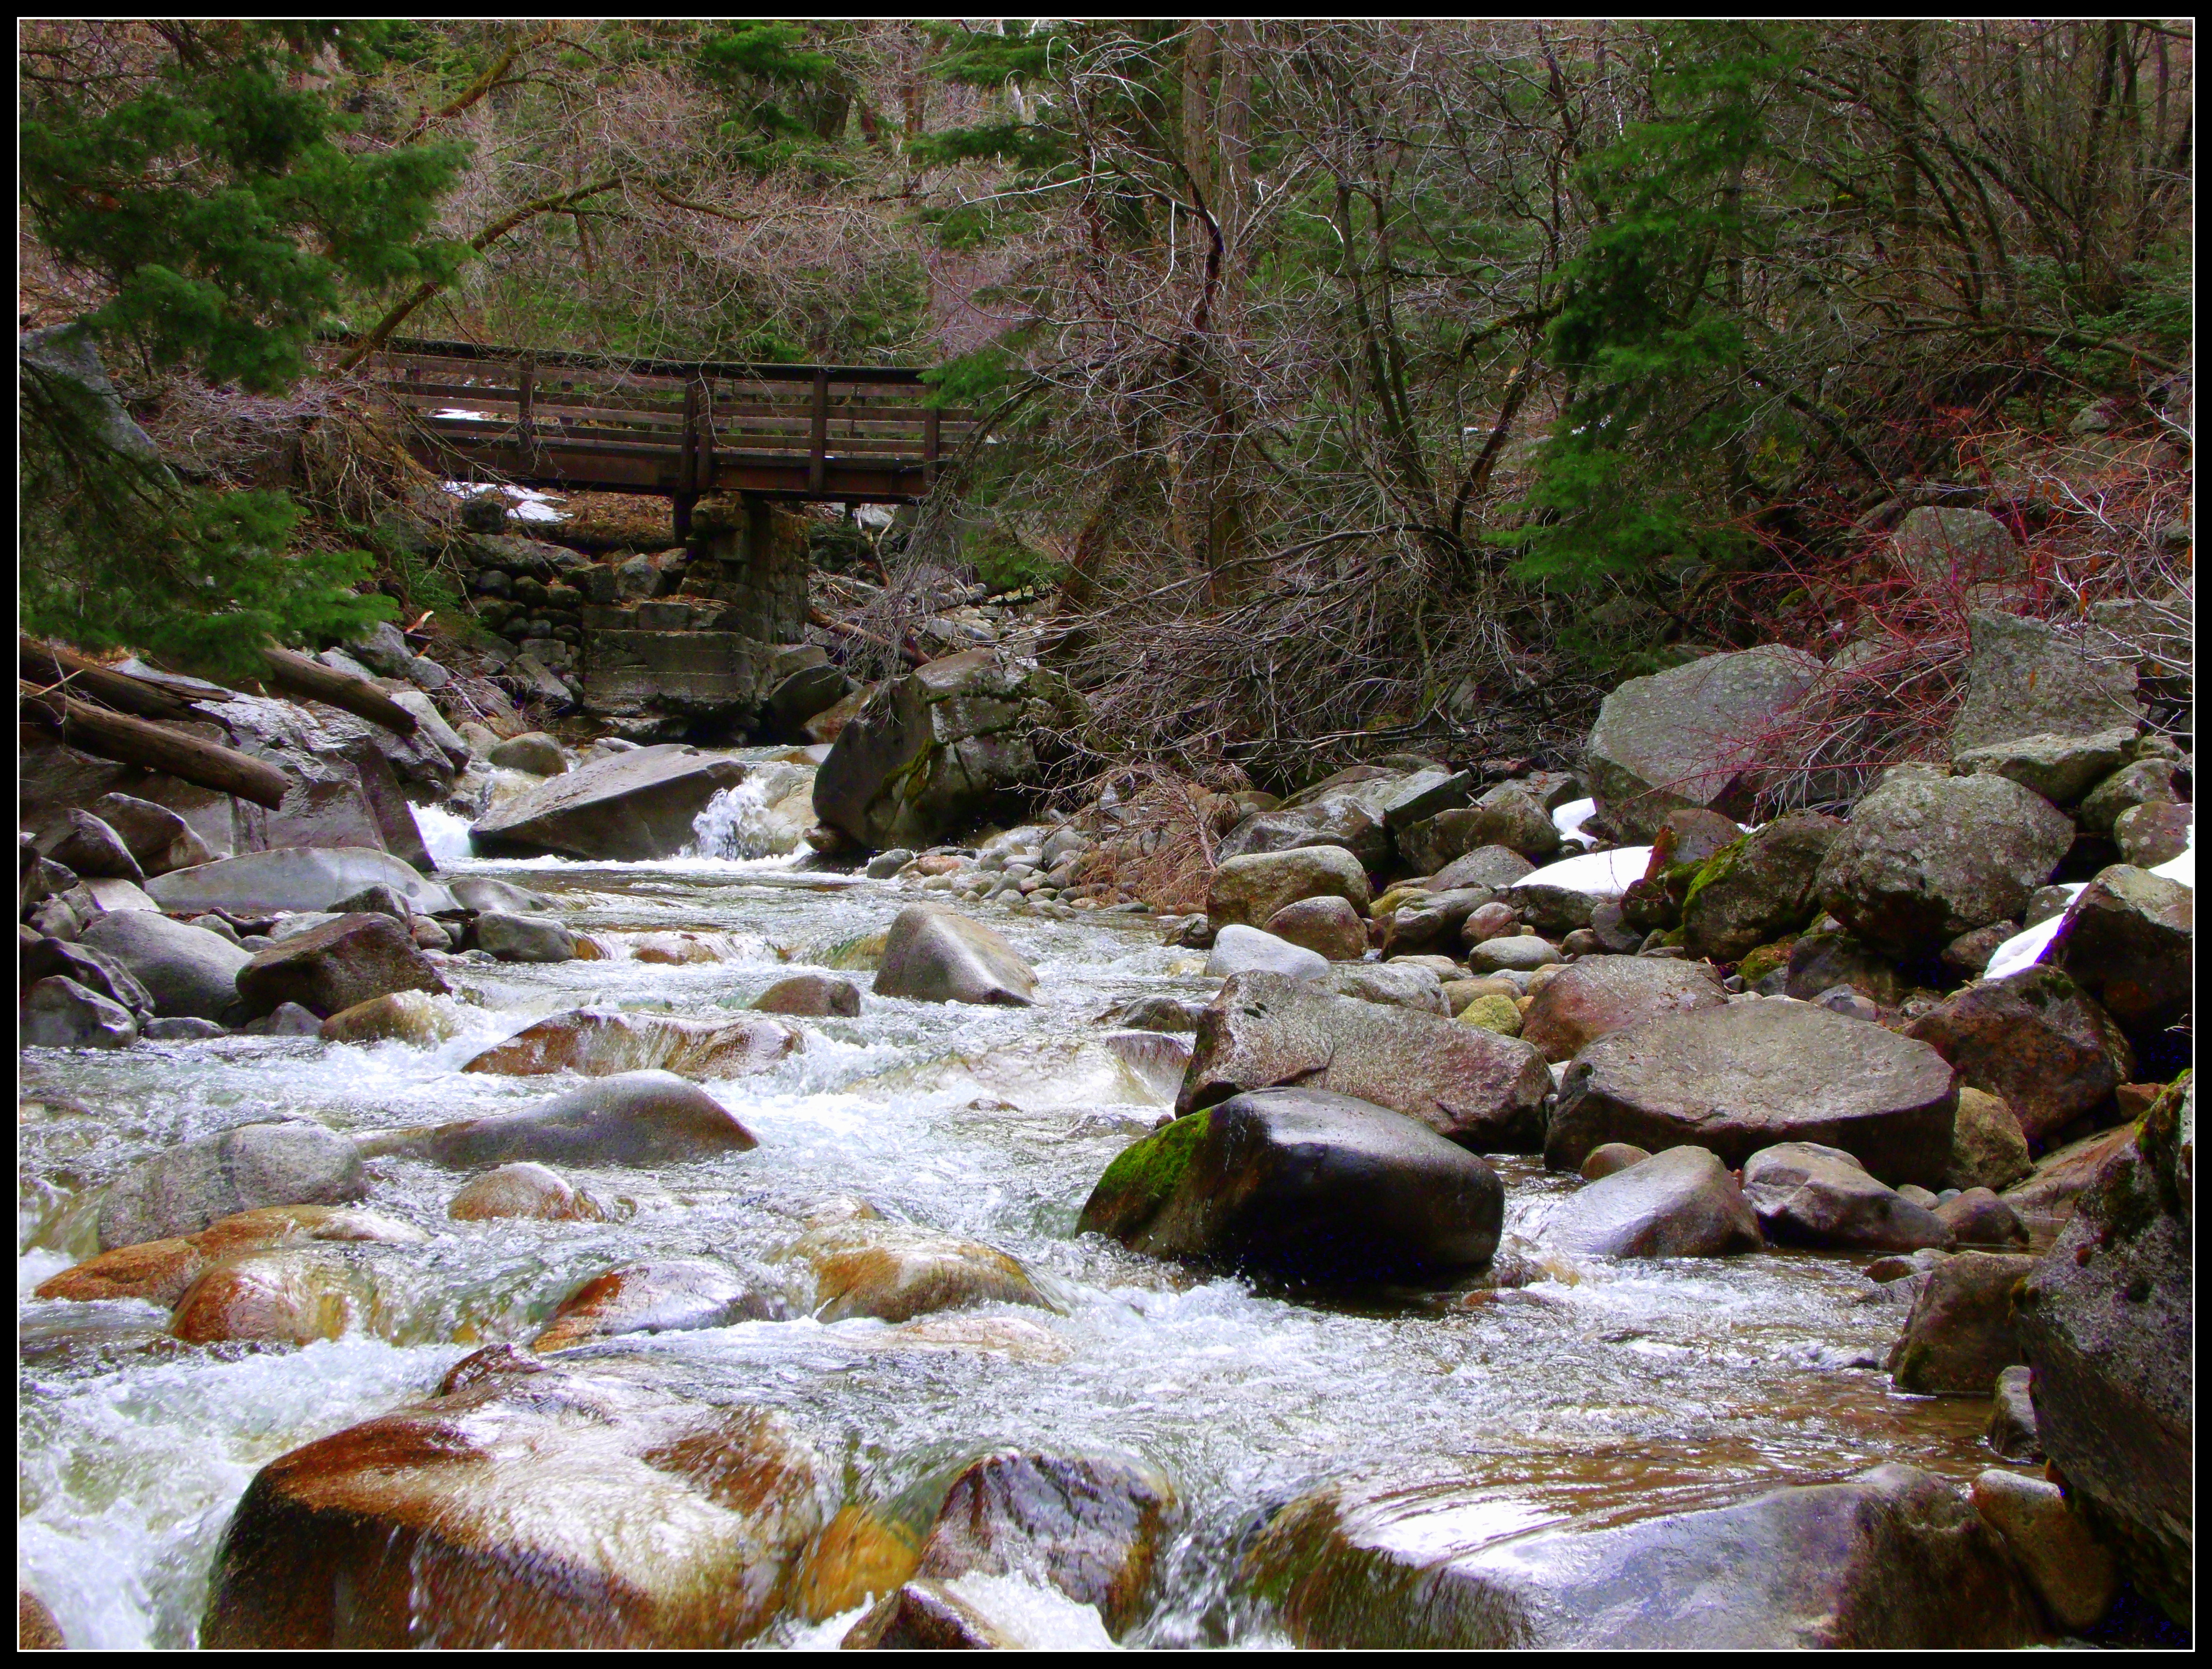 bridge over stream | Scott's Place...Images and Words